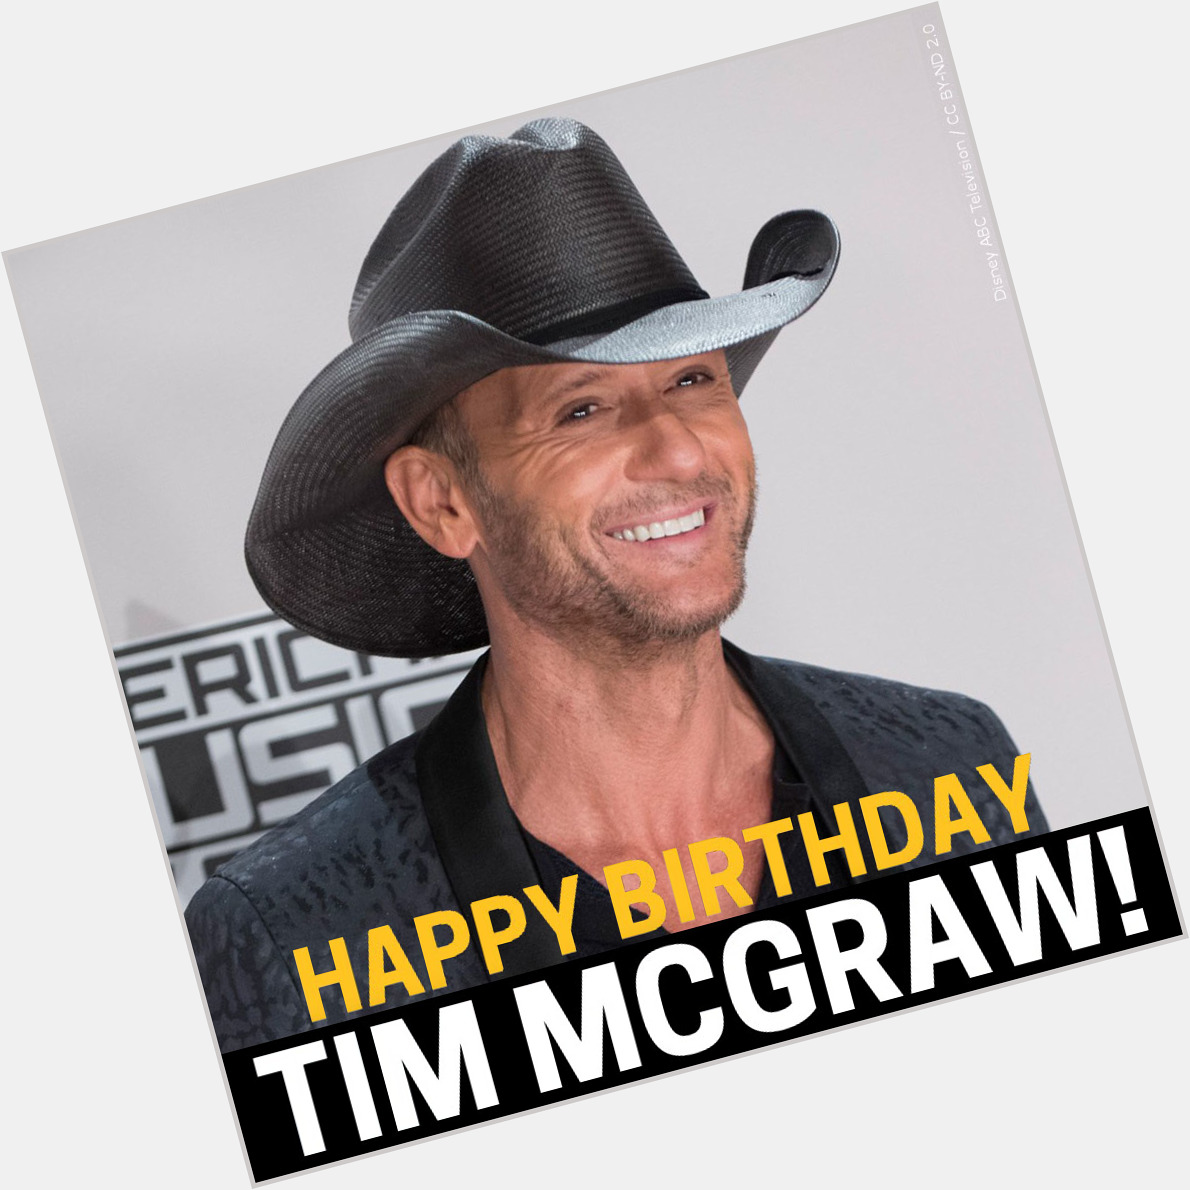 HAPPY BIRTHDAY TIM MCGRAW! The country star turns 56 today. 